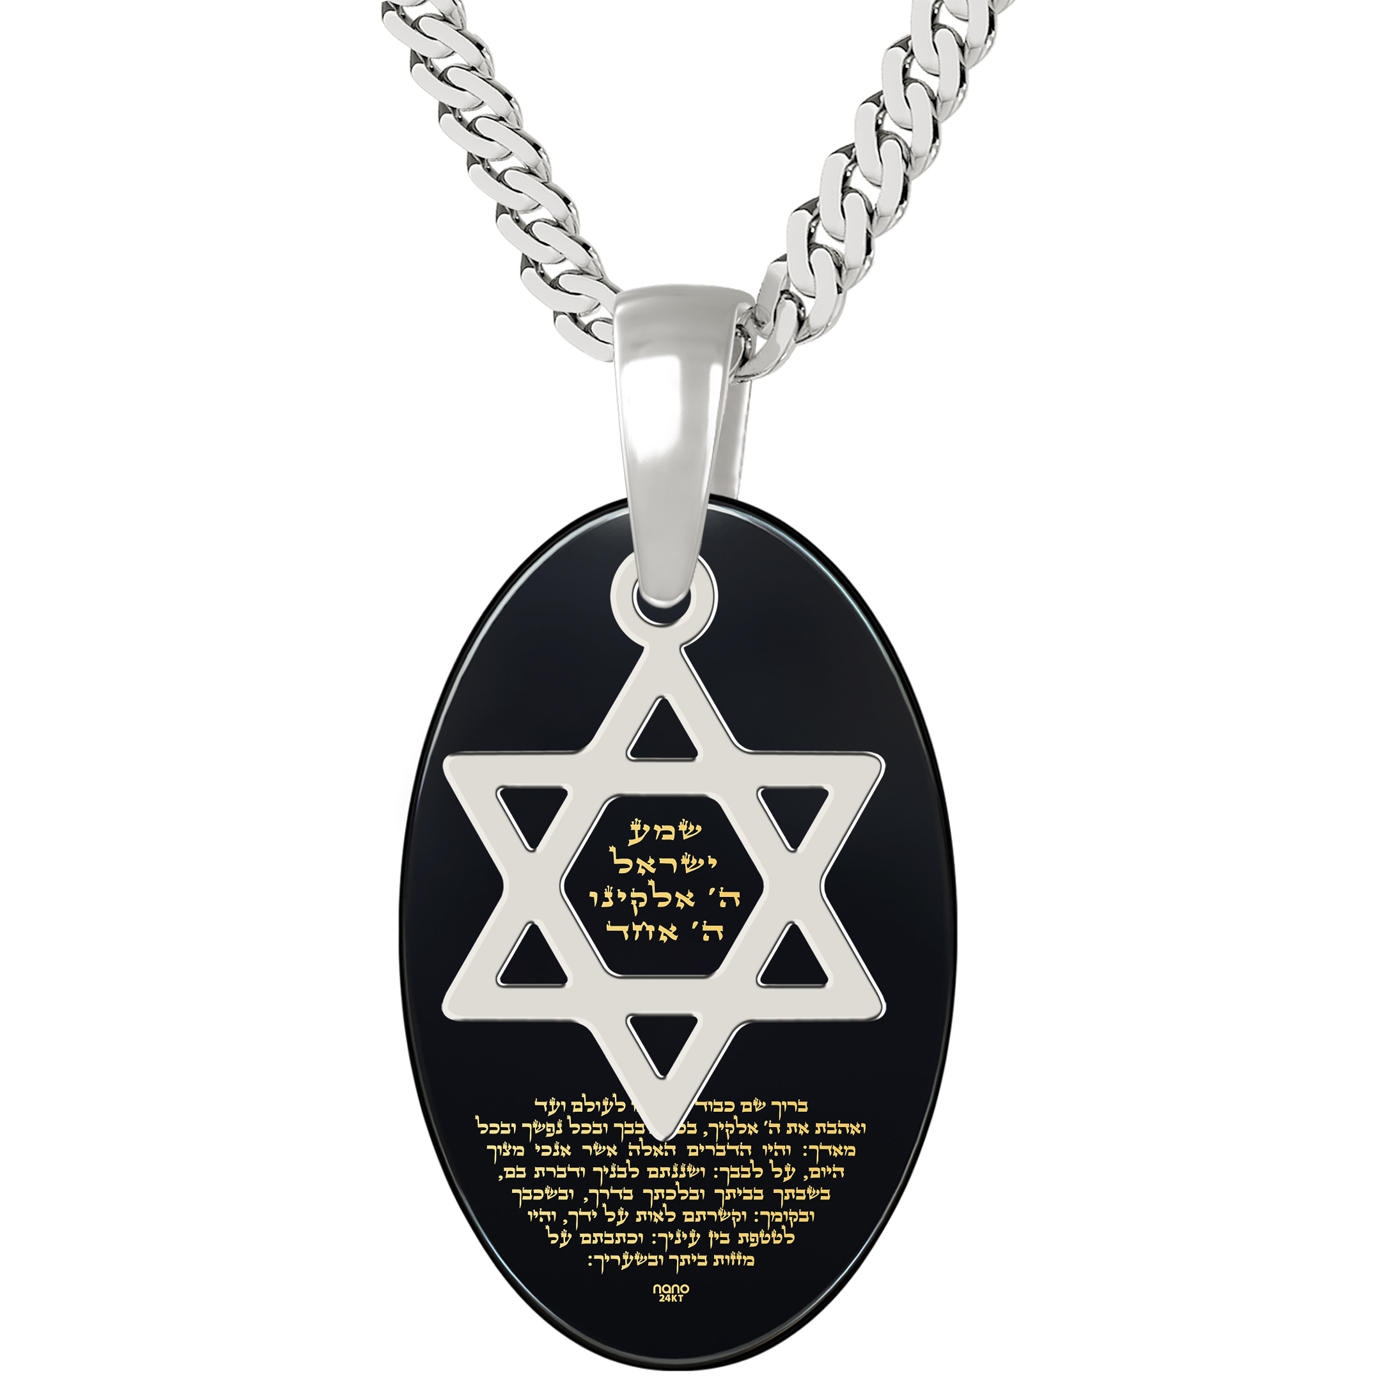 Sterling Silver and Onyx Oval Necklace with Star of David Necklace and Micro-Inscribed Shema Yisrael (Deuteronomy 6:4-9) - 3